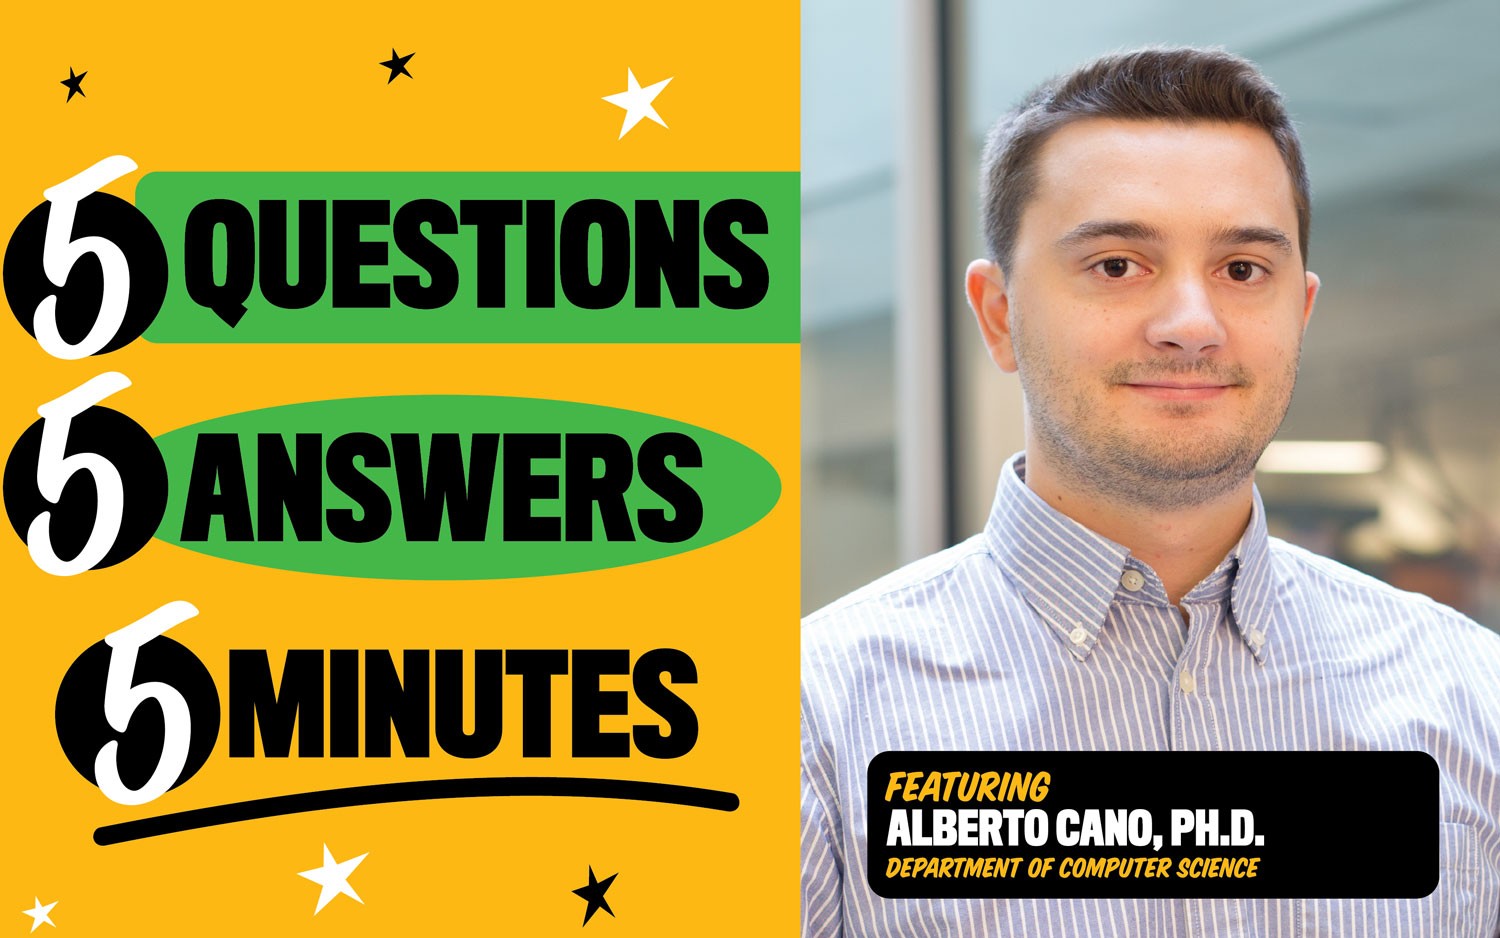 Q&A with Alberto Cano, Ph.D.